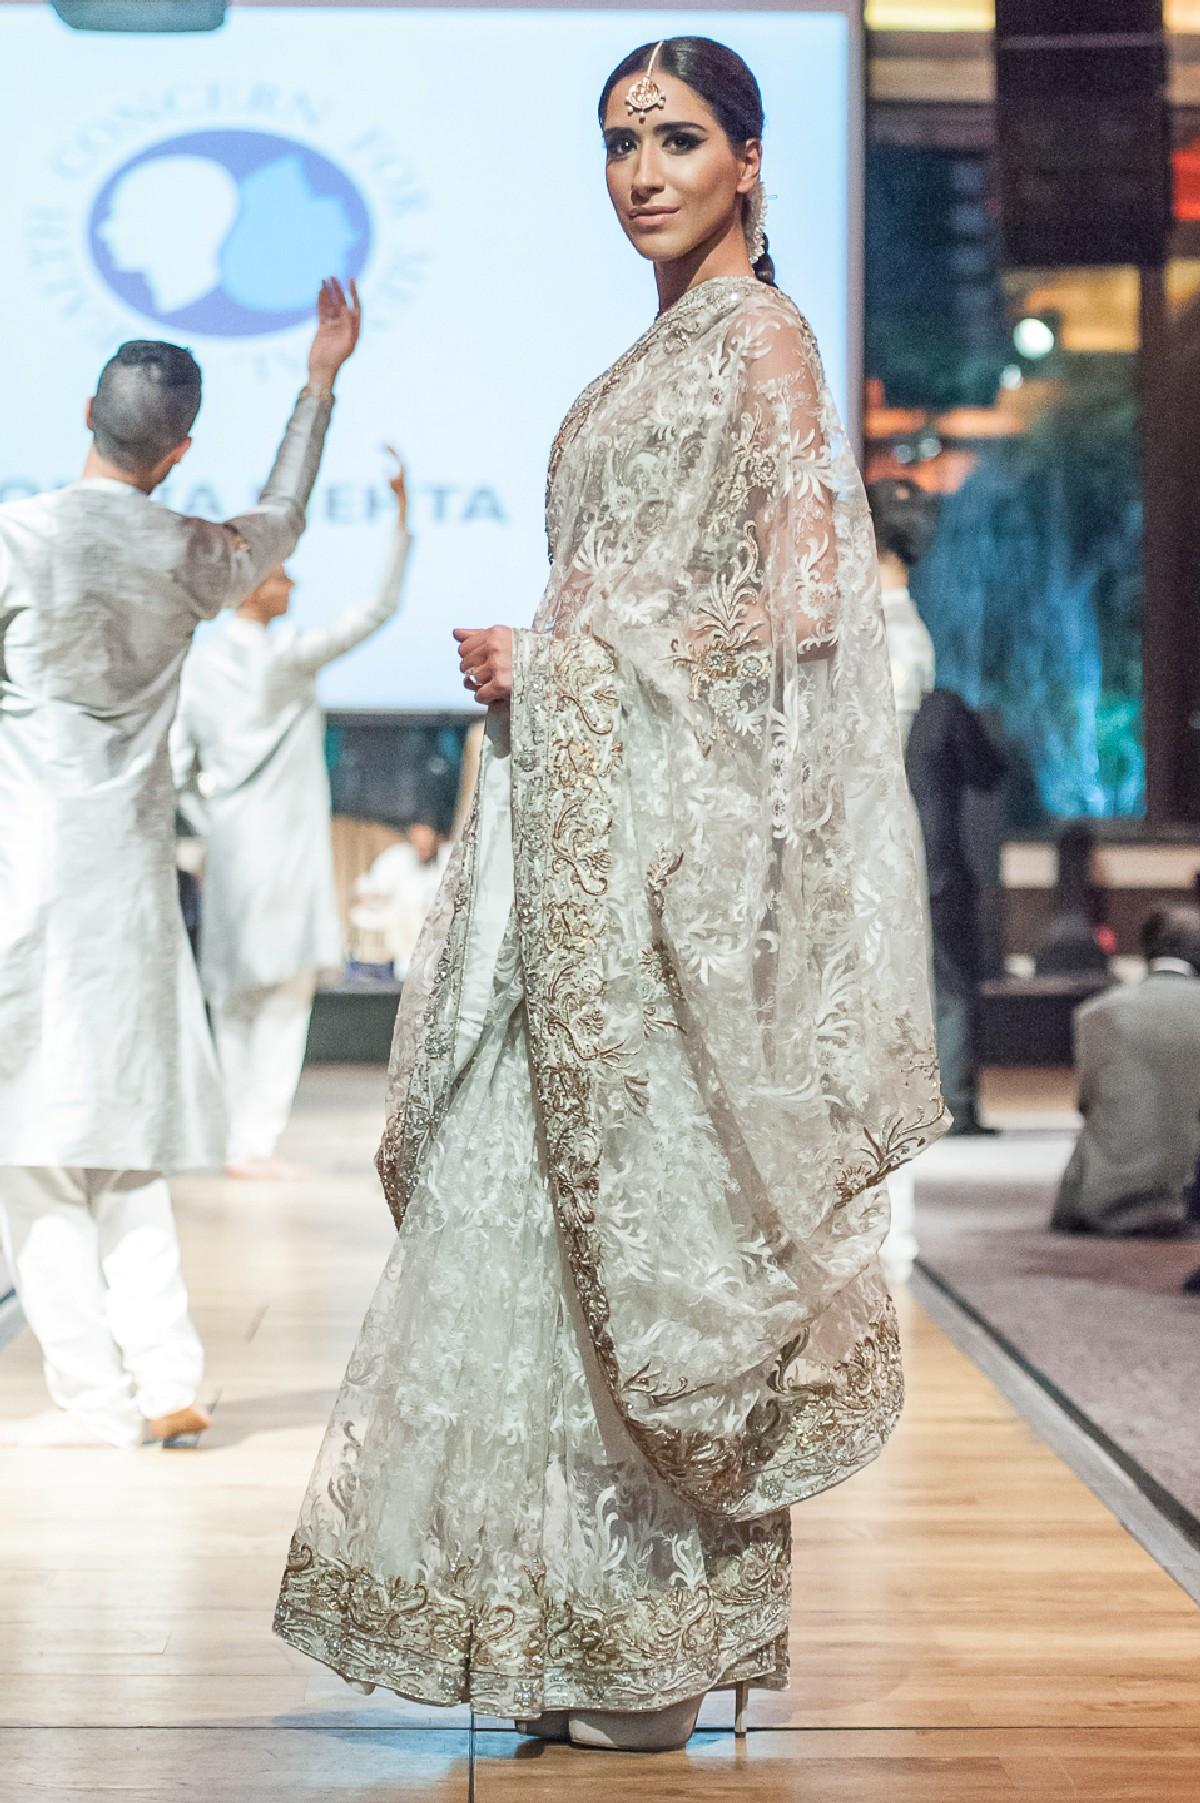 Asian couture retailer O’nitaa hosted a fashion show at a private charity event, unveiling some of its striking collections. It took place at the Grange St Paul’s Hotel, London on Saturday 16 November, 2013. Designs from Rana Noman, Mina Hasan, Mansi 